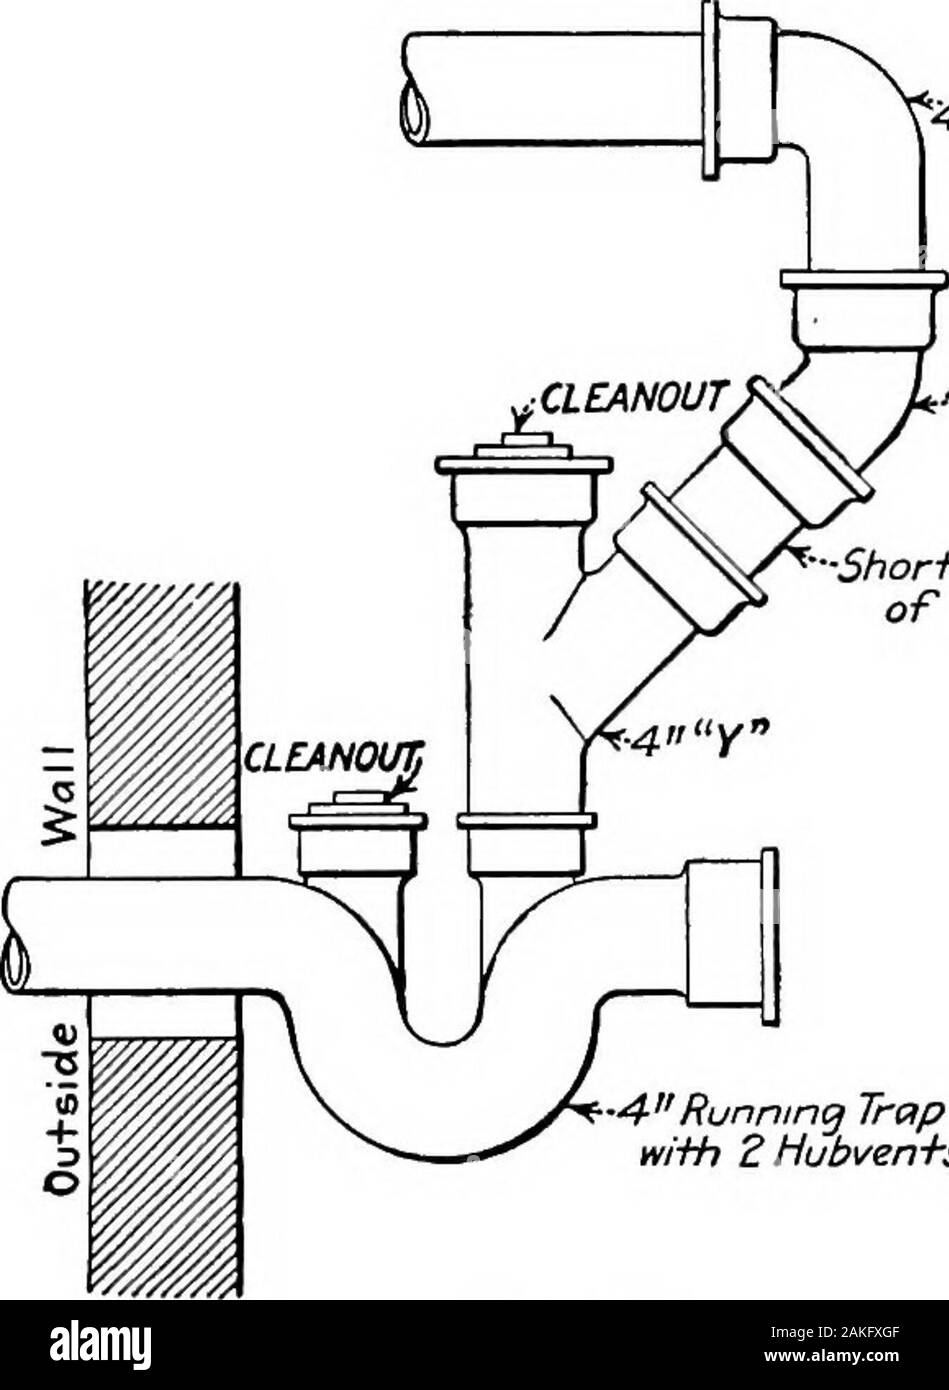 Elements of plumbing . stick is cut 8 feet long which can be used toget the  trenches below the cement floor at the right depth.After the digging is  completed, the house trap,